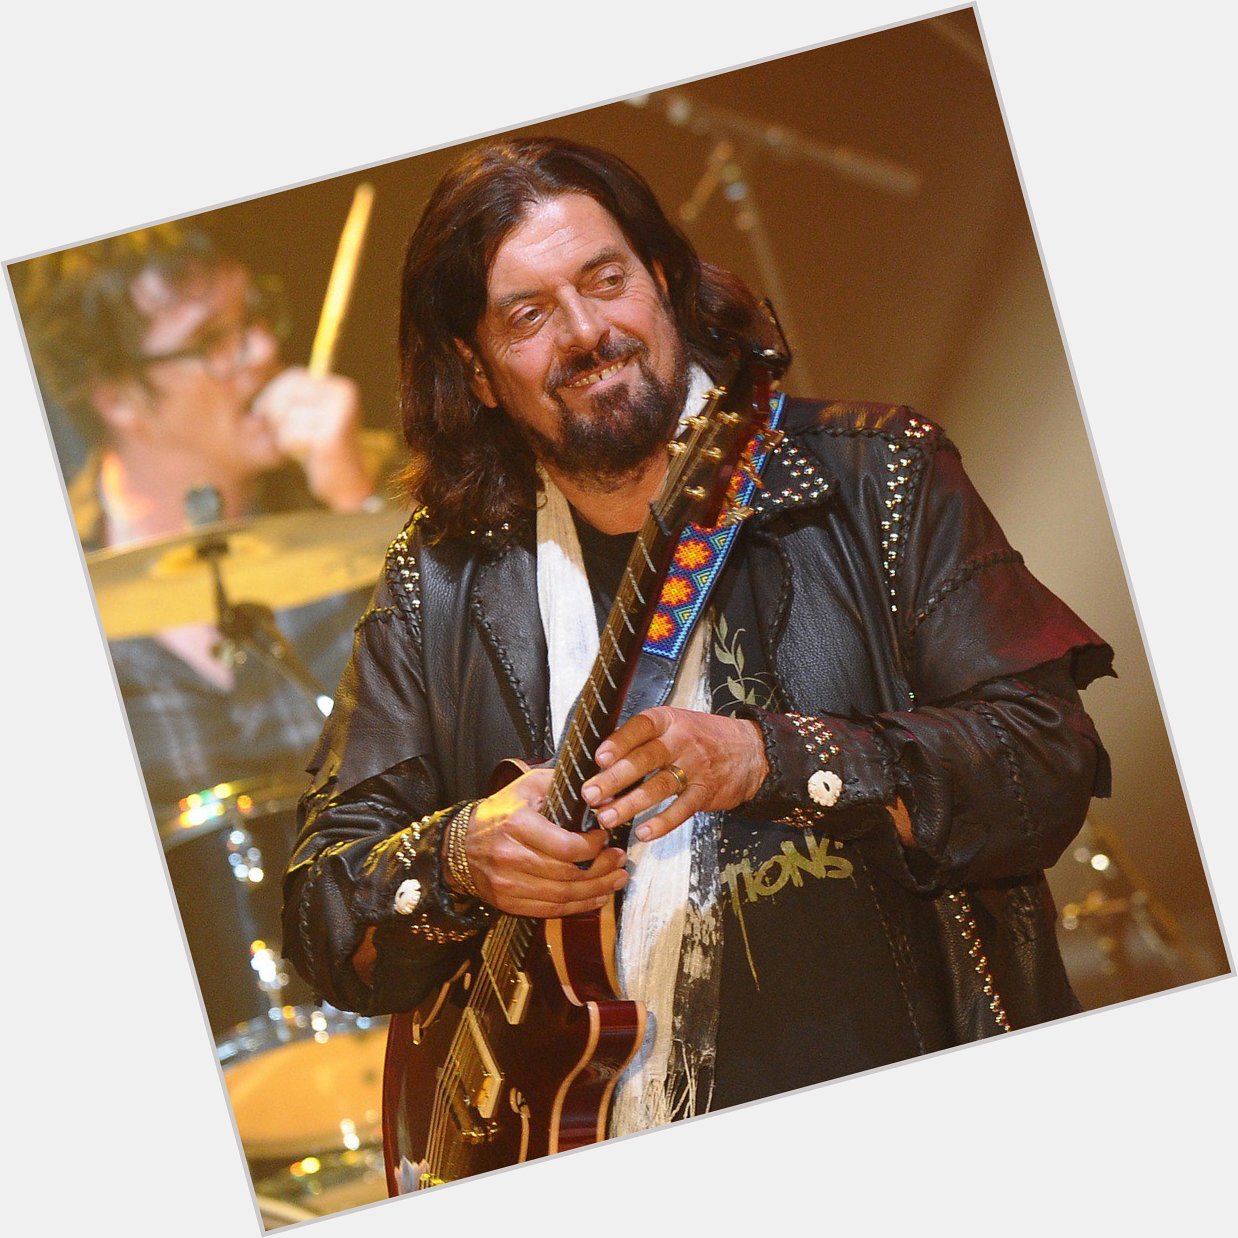 Happy birthday to who gave progressive rock fans so much as leader of the Alan Parsons Project. 